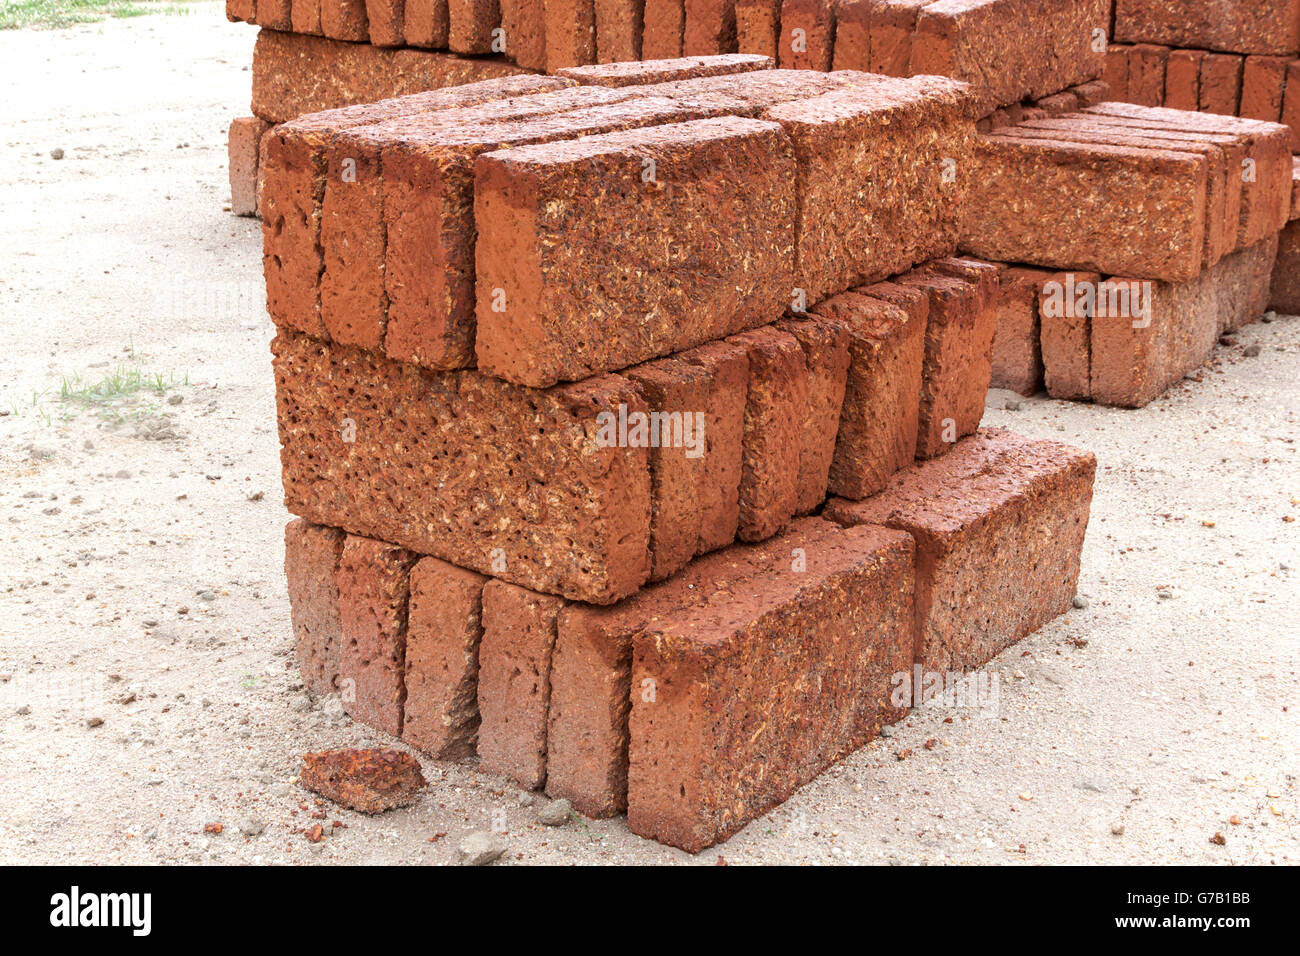 laterite pile a hazel filled with rough surfaces on floor Stock Photo